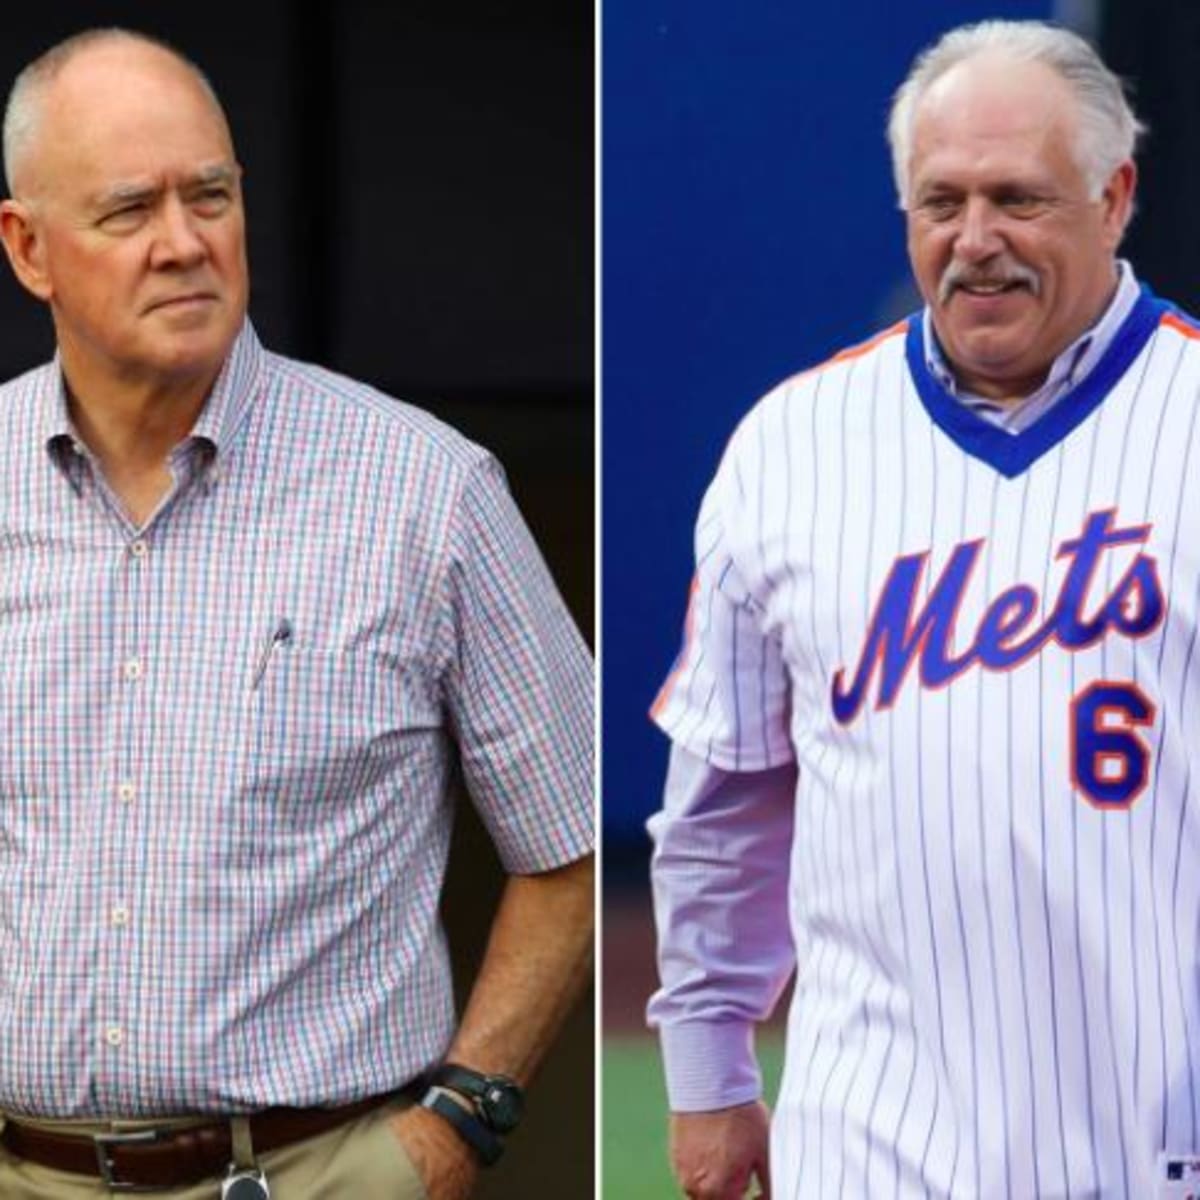 Wally Backman is leaving the Mets organization - NBC Sports